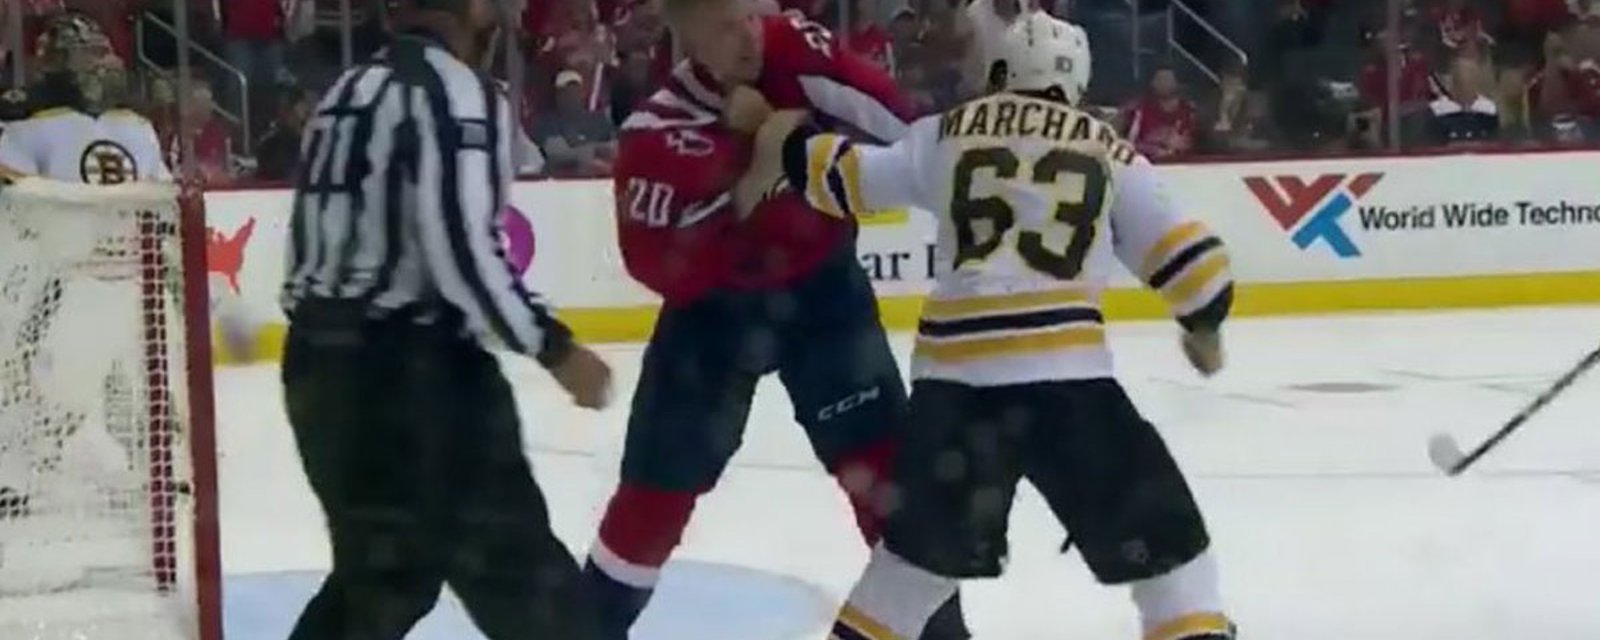 Breaking: NHL makes controversial decision after Marchand jumps and sucker punches Eller